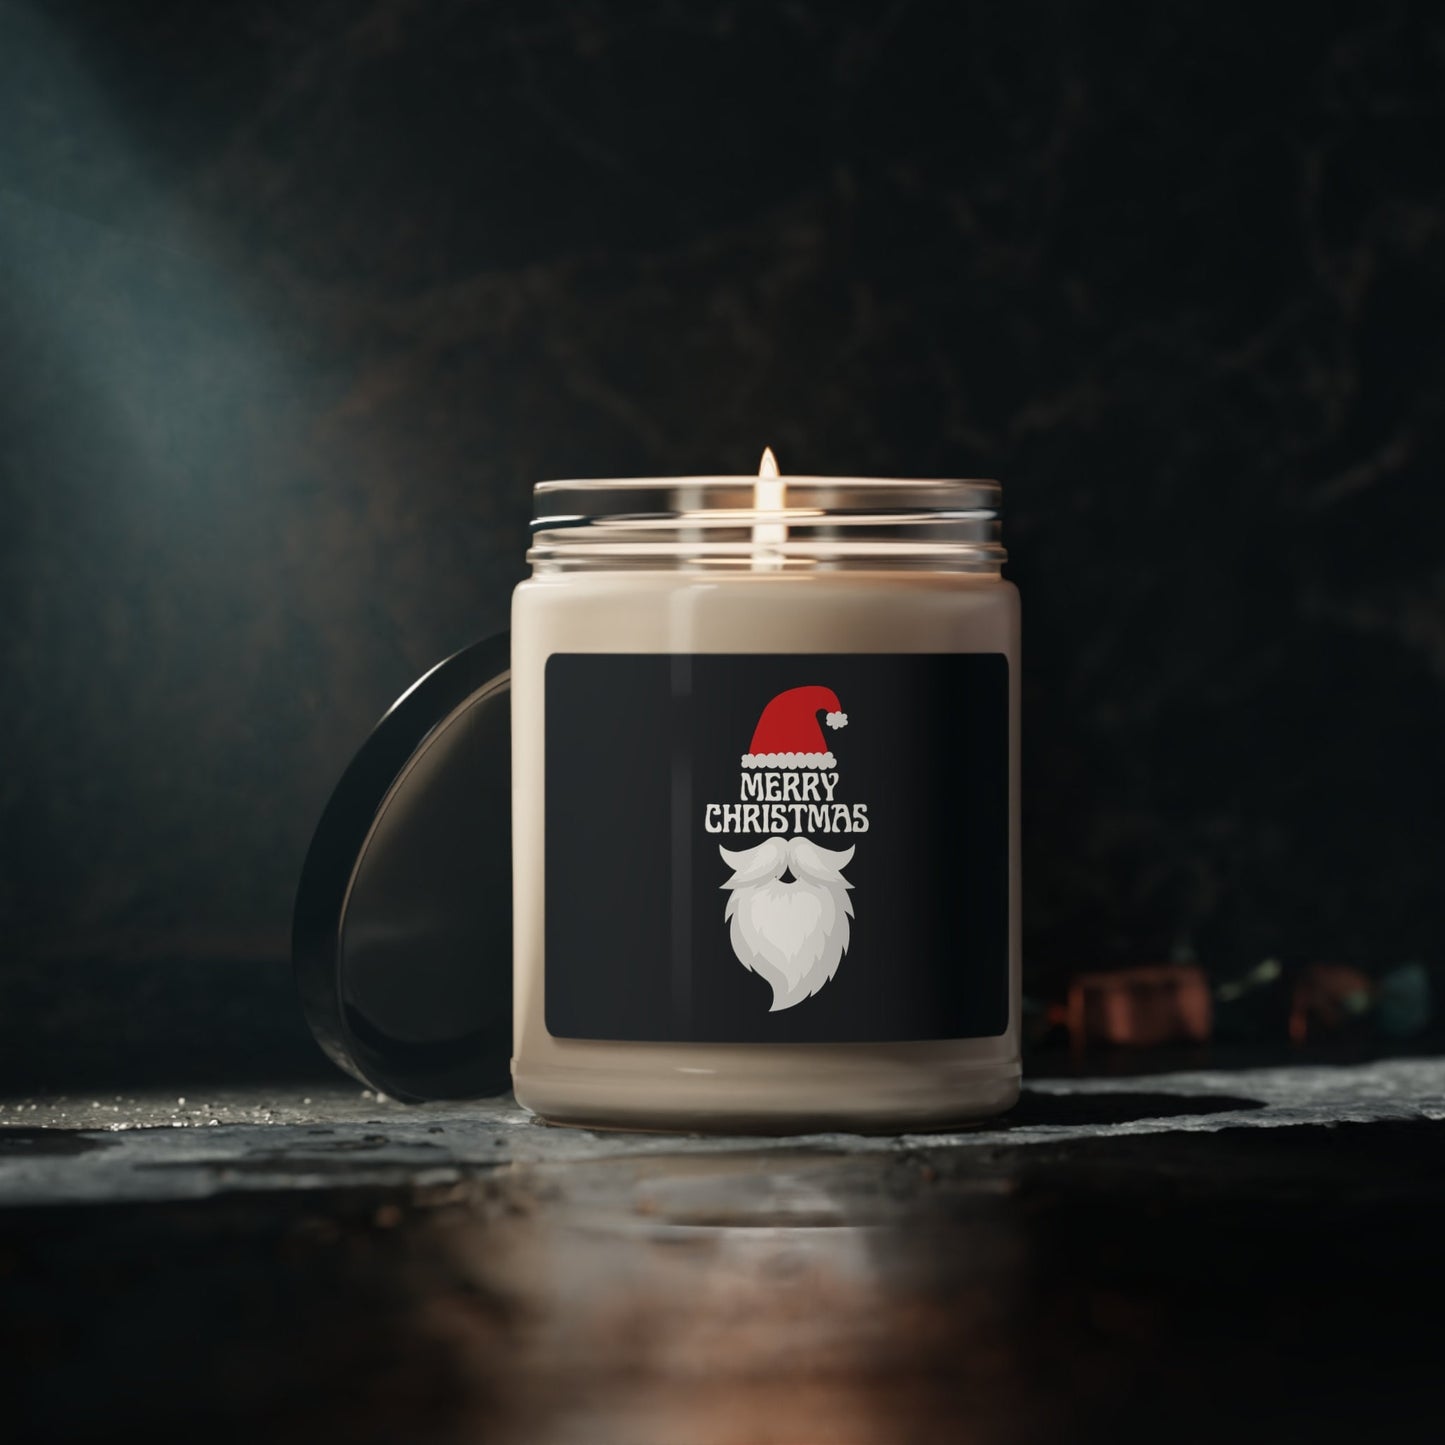 Merry Christmas with Santa Beard Scented Soy Candle, 9oz